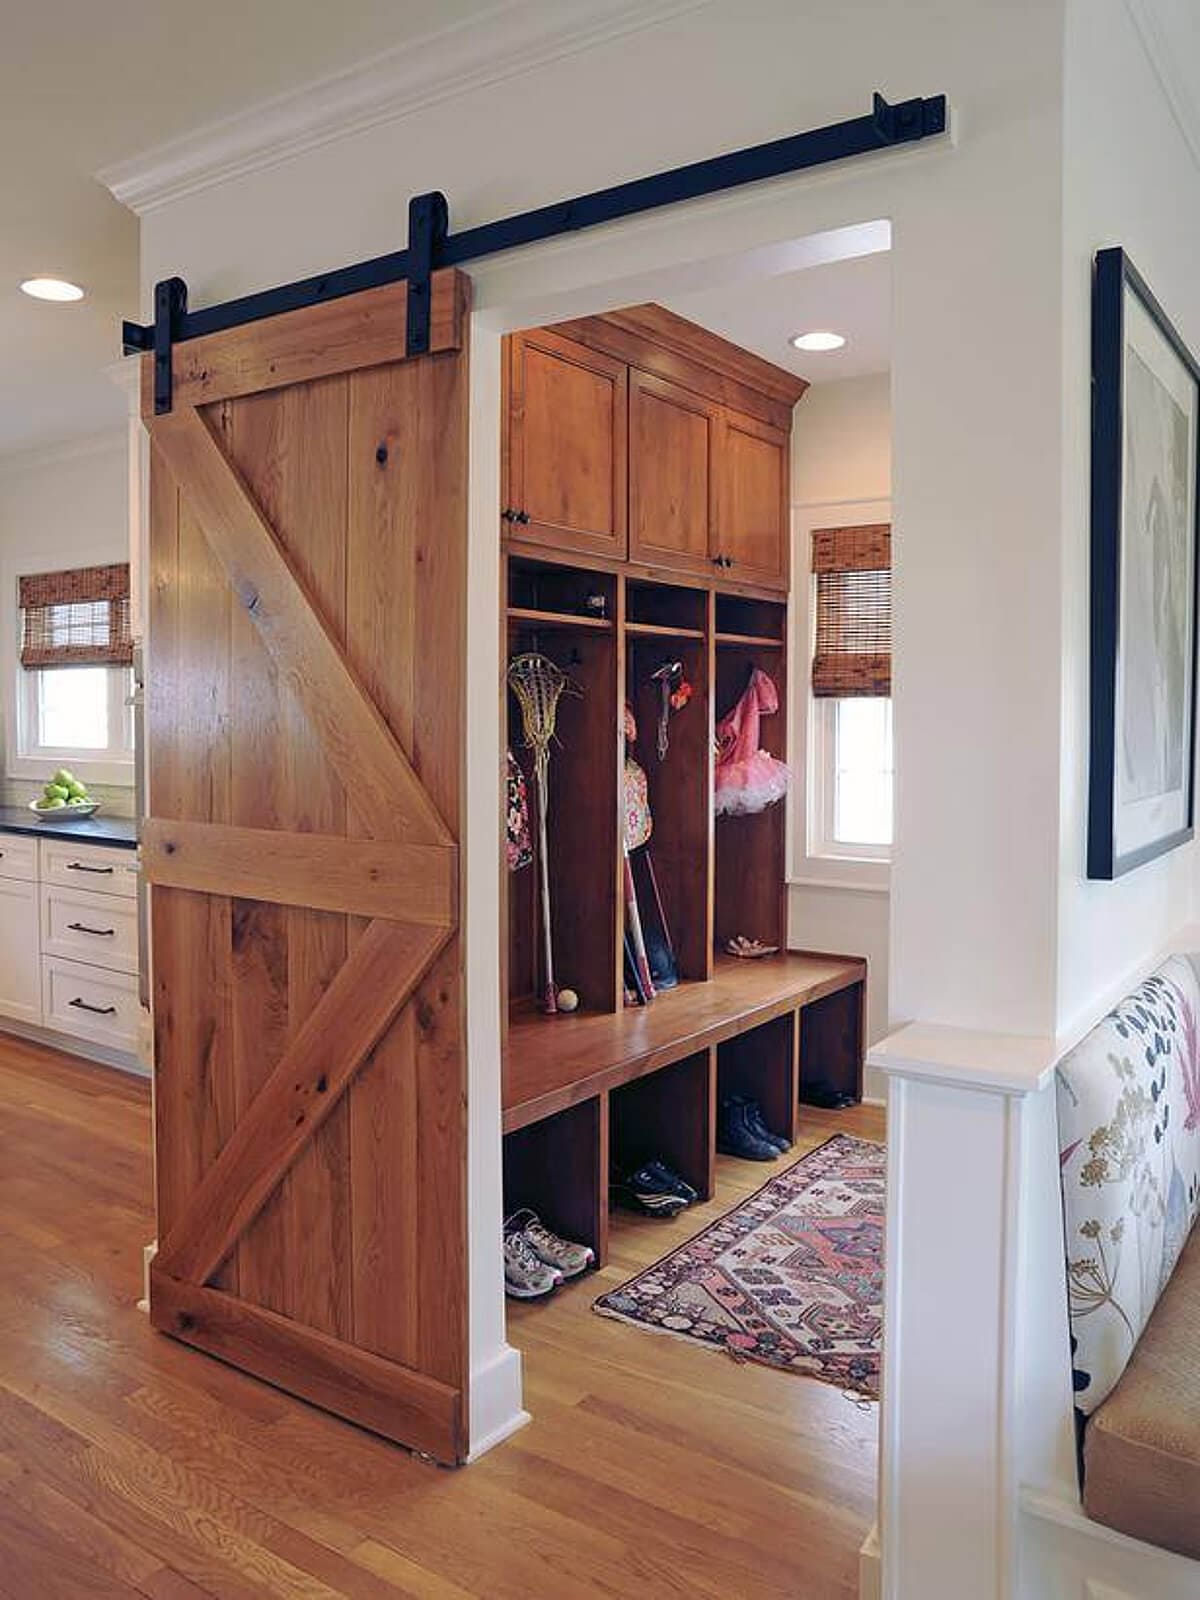 20 mudroom ideas to liven up your entryway - 69